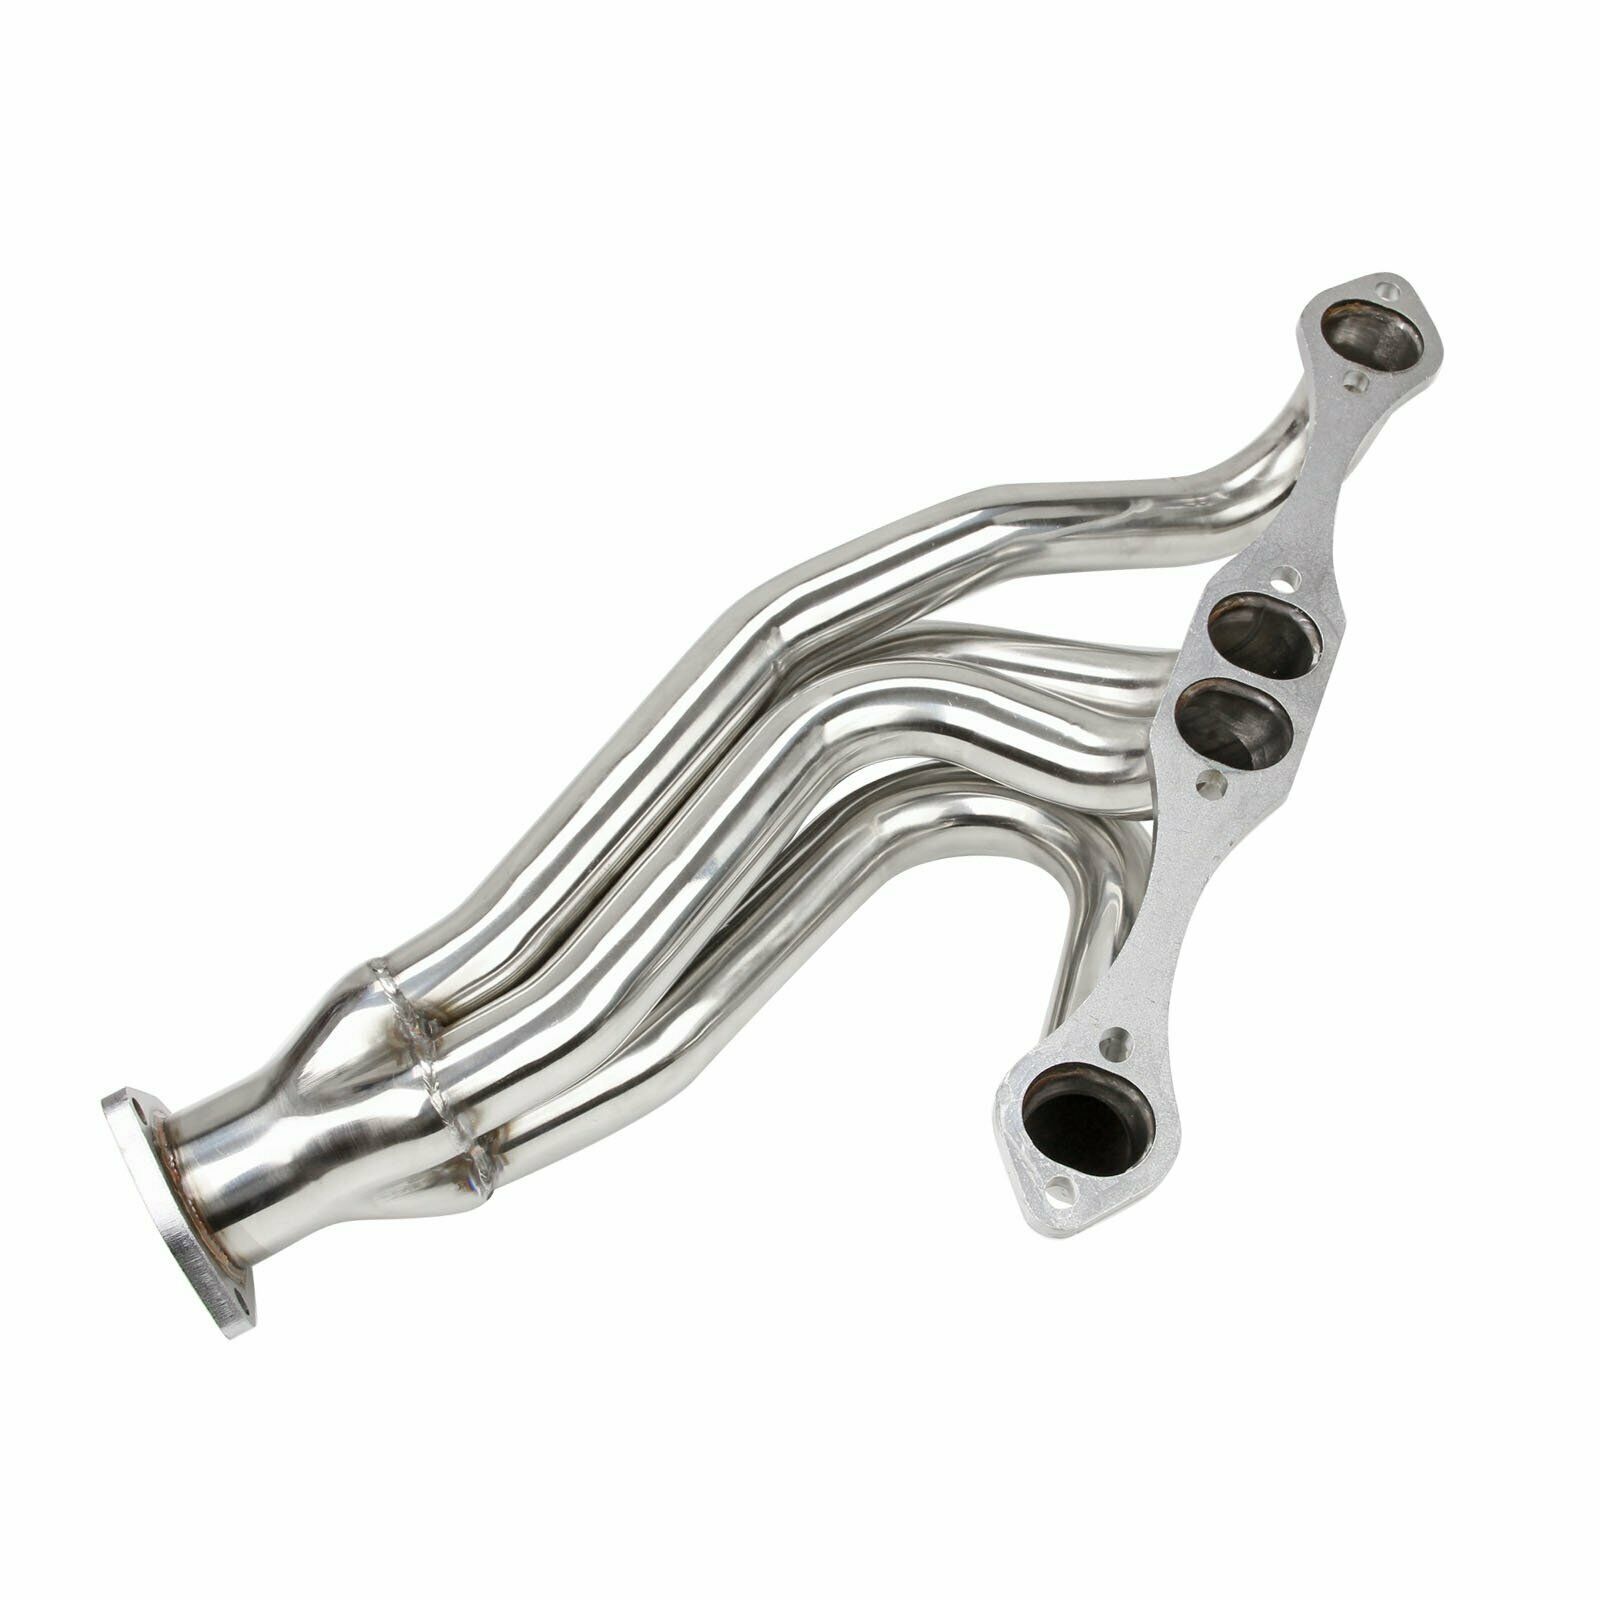 Stainless Steel Headers Fits 1955-1957 SBC Small Block Chevy Bel Air Stainless Steel Headers Small Block Chevy